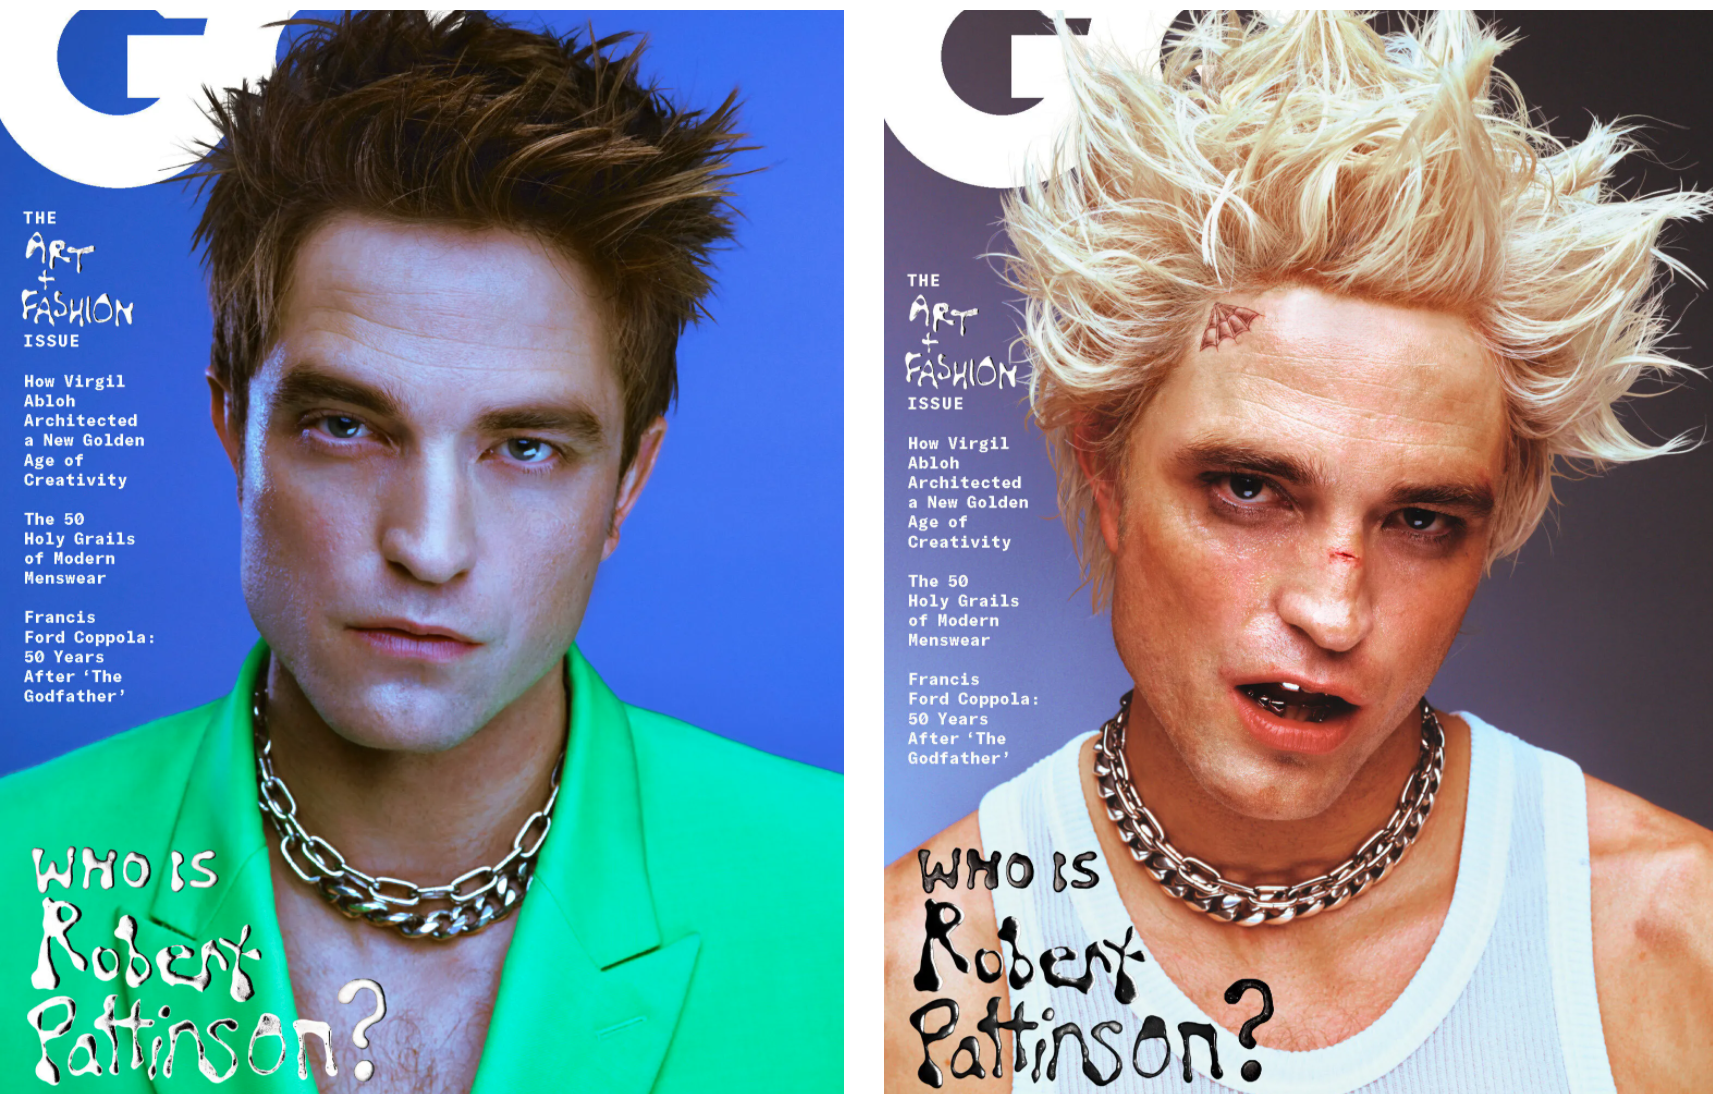 Robert Pattinson Is A Early 2000s Pixie Dream Boy On The Cover Of GQ & It's  Going Viral - B&T